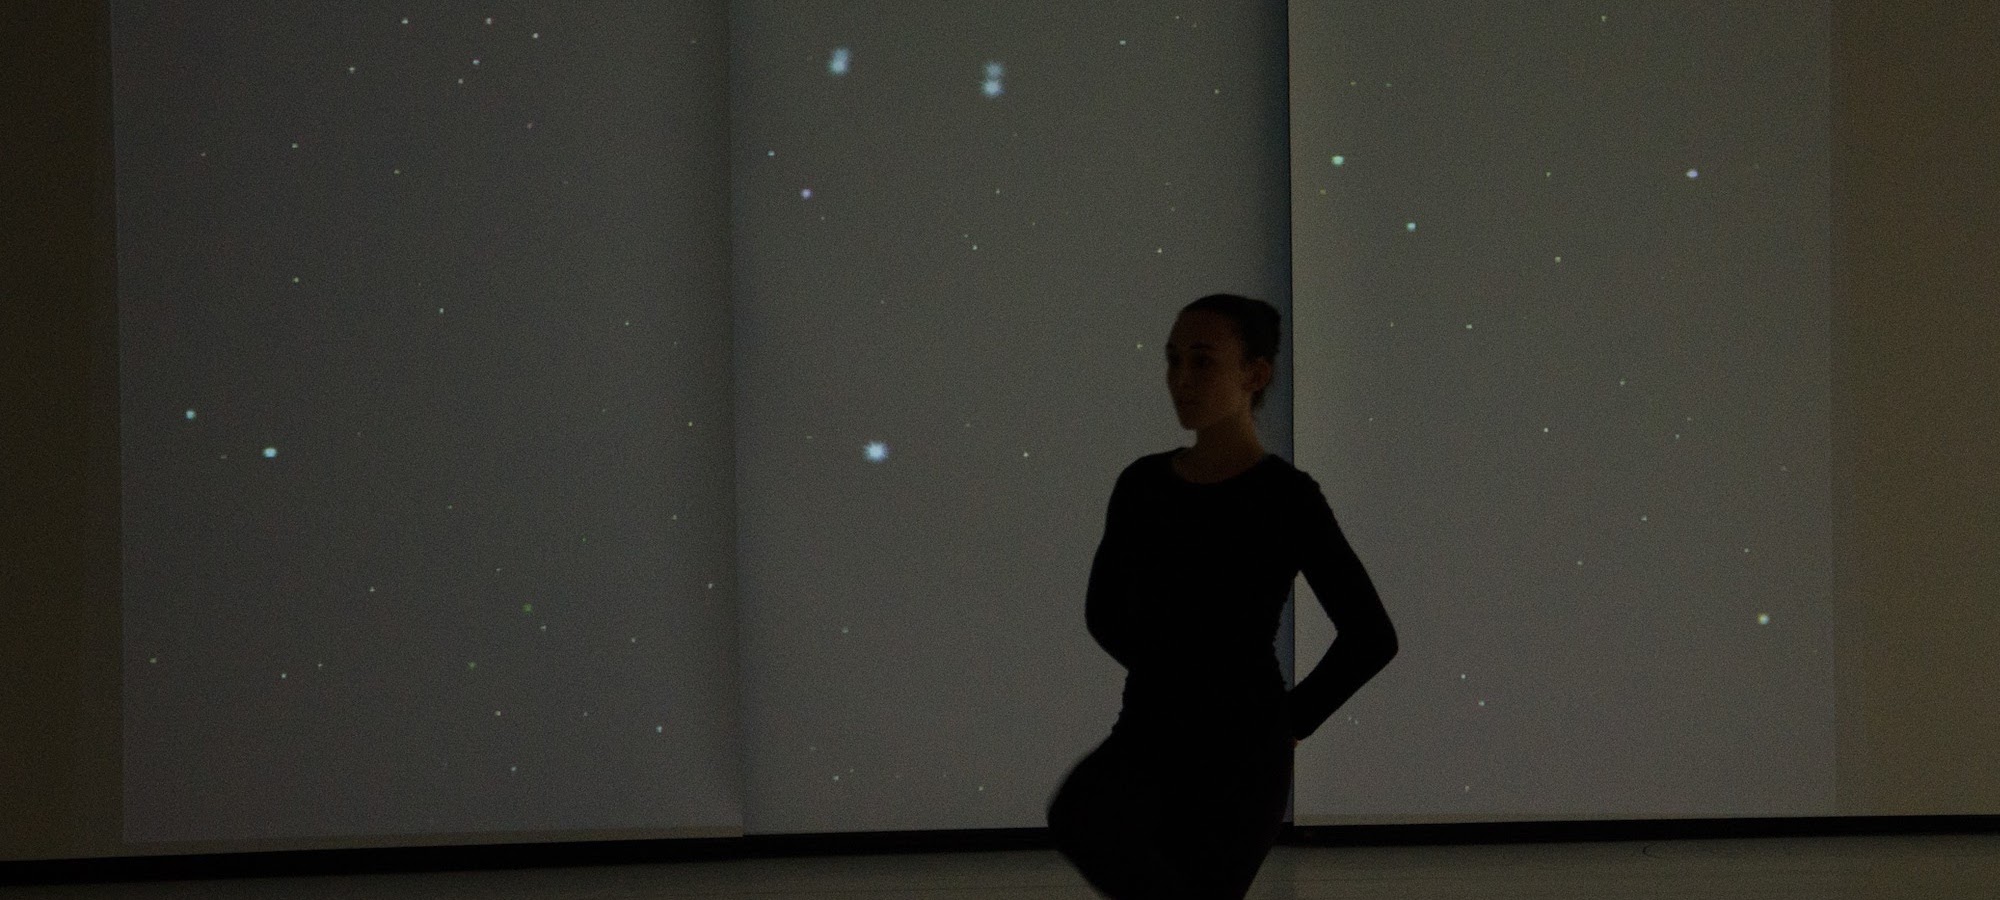 A dancer silhouetted in front of a projection of stars